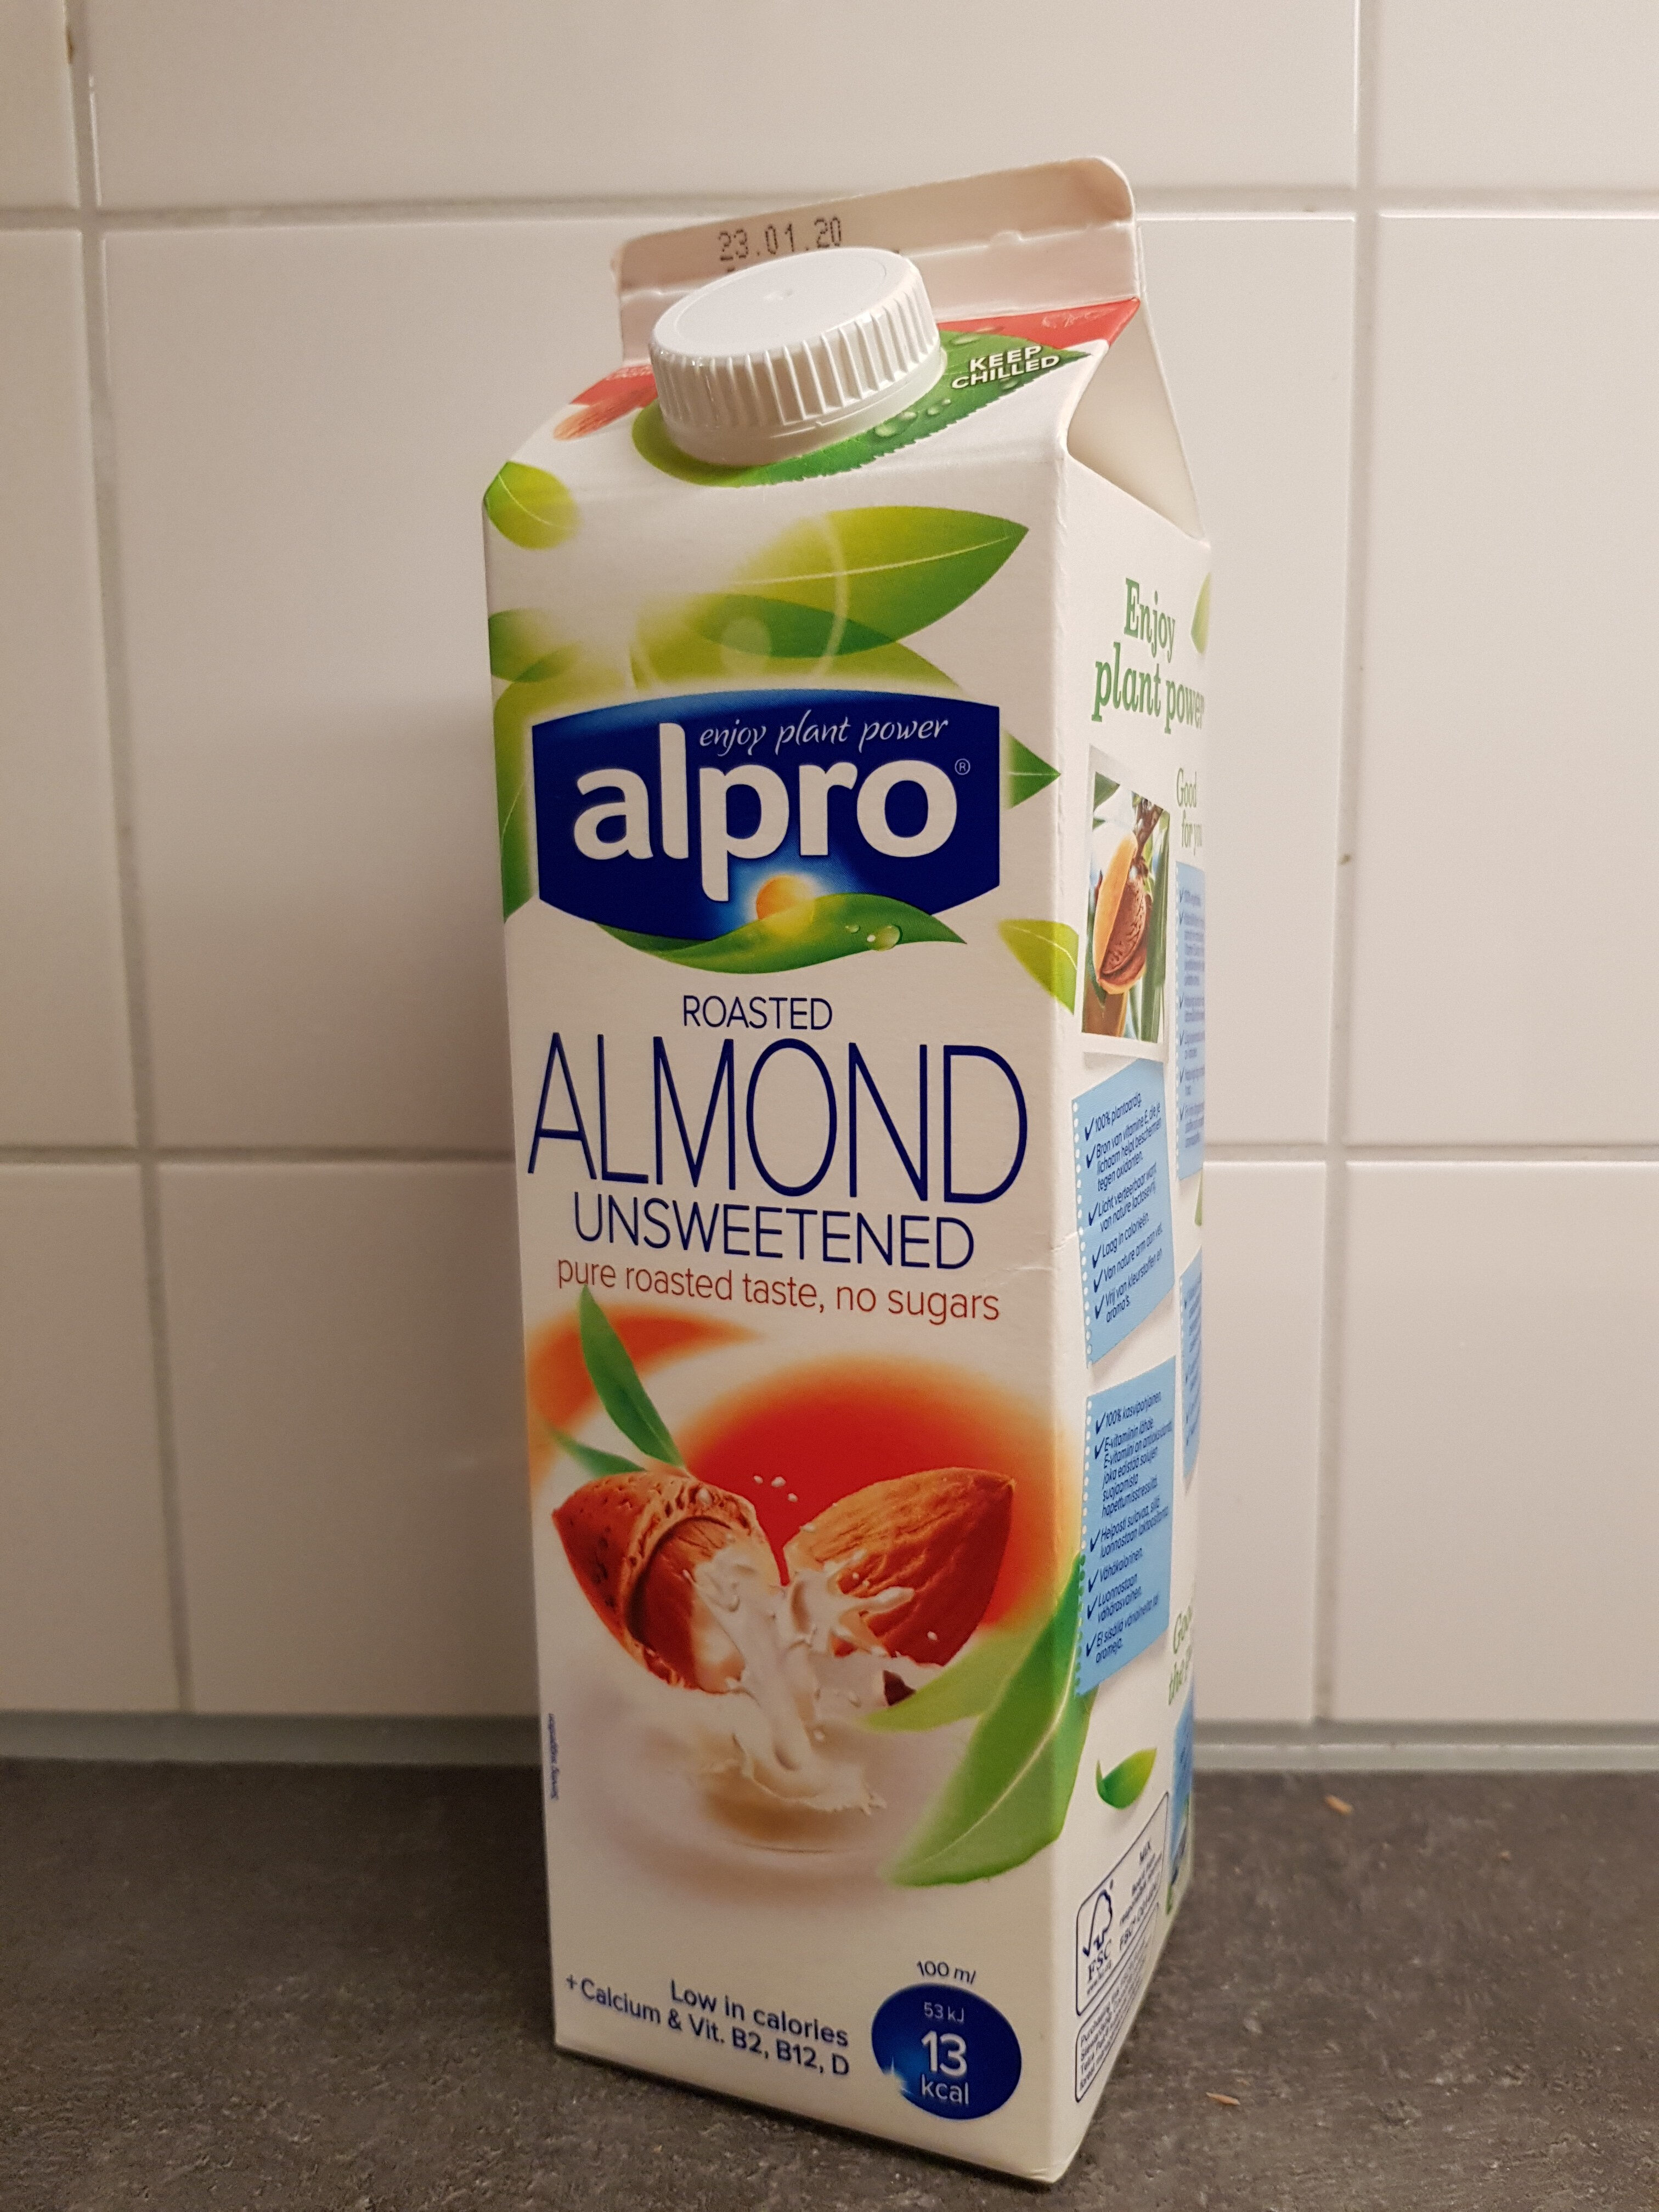 Almond Unsweetened Drink - Product